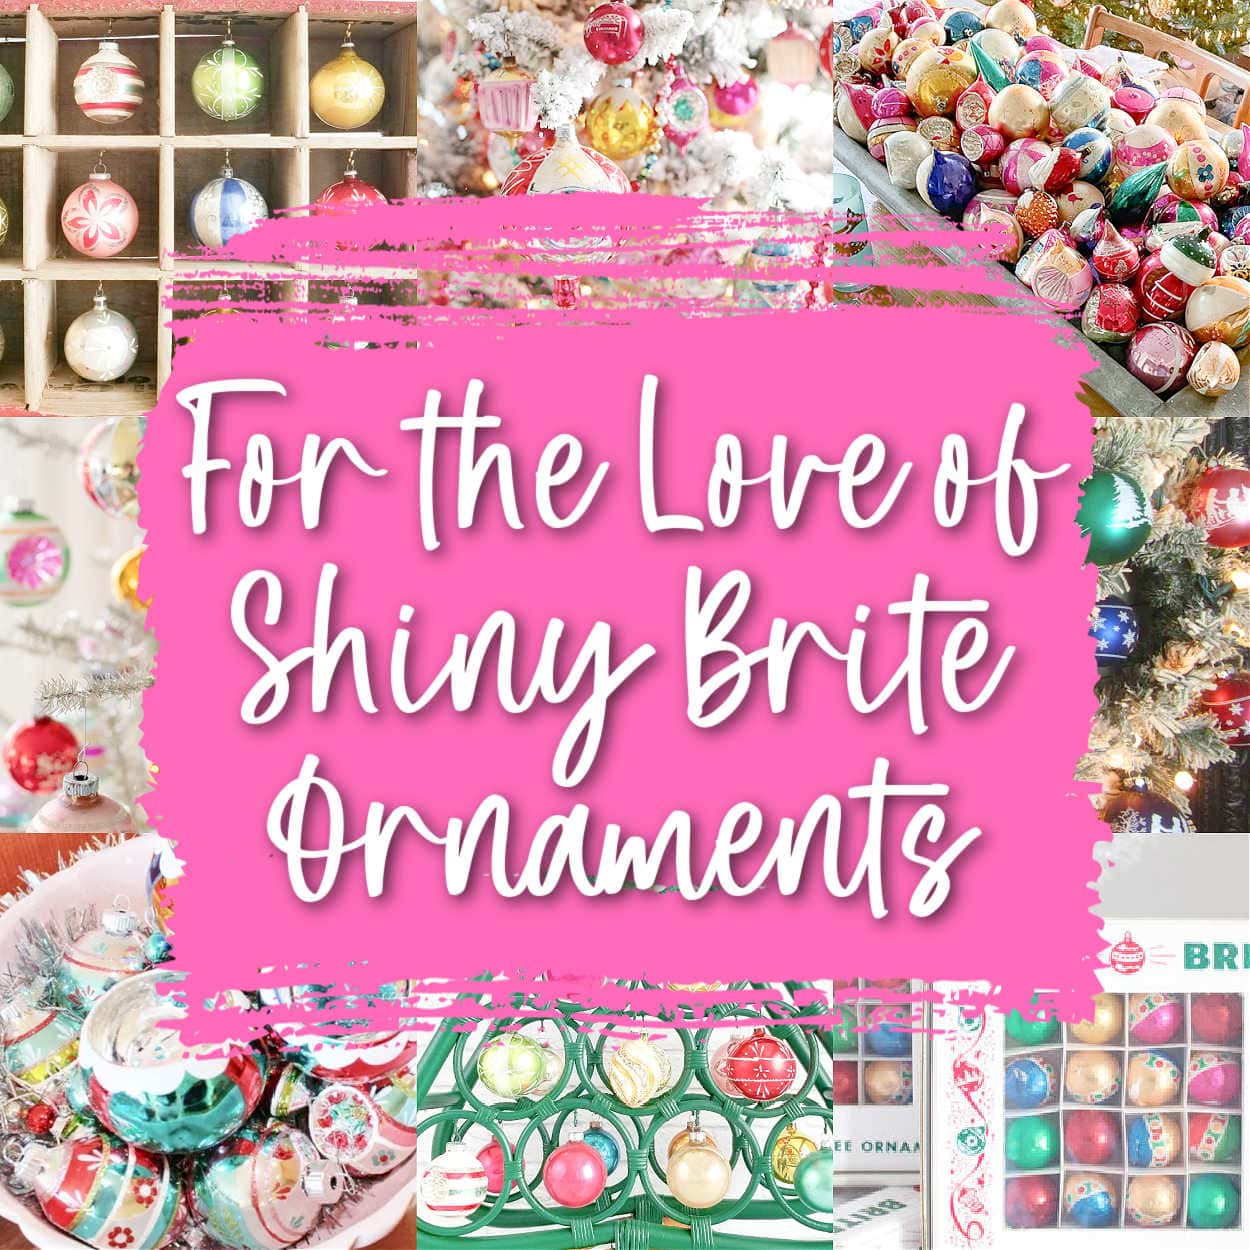 shiny brite ornaments for collecting and displaying